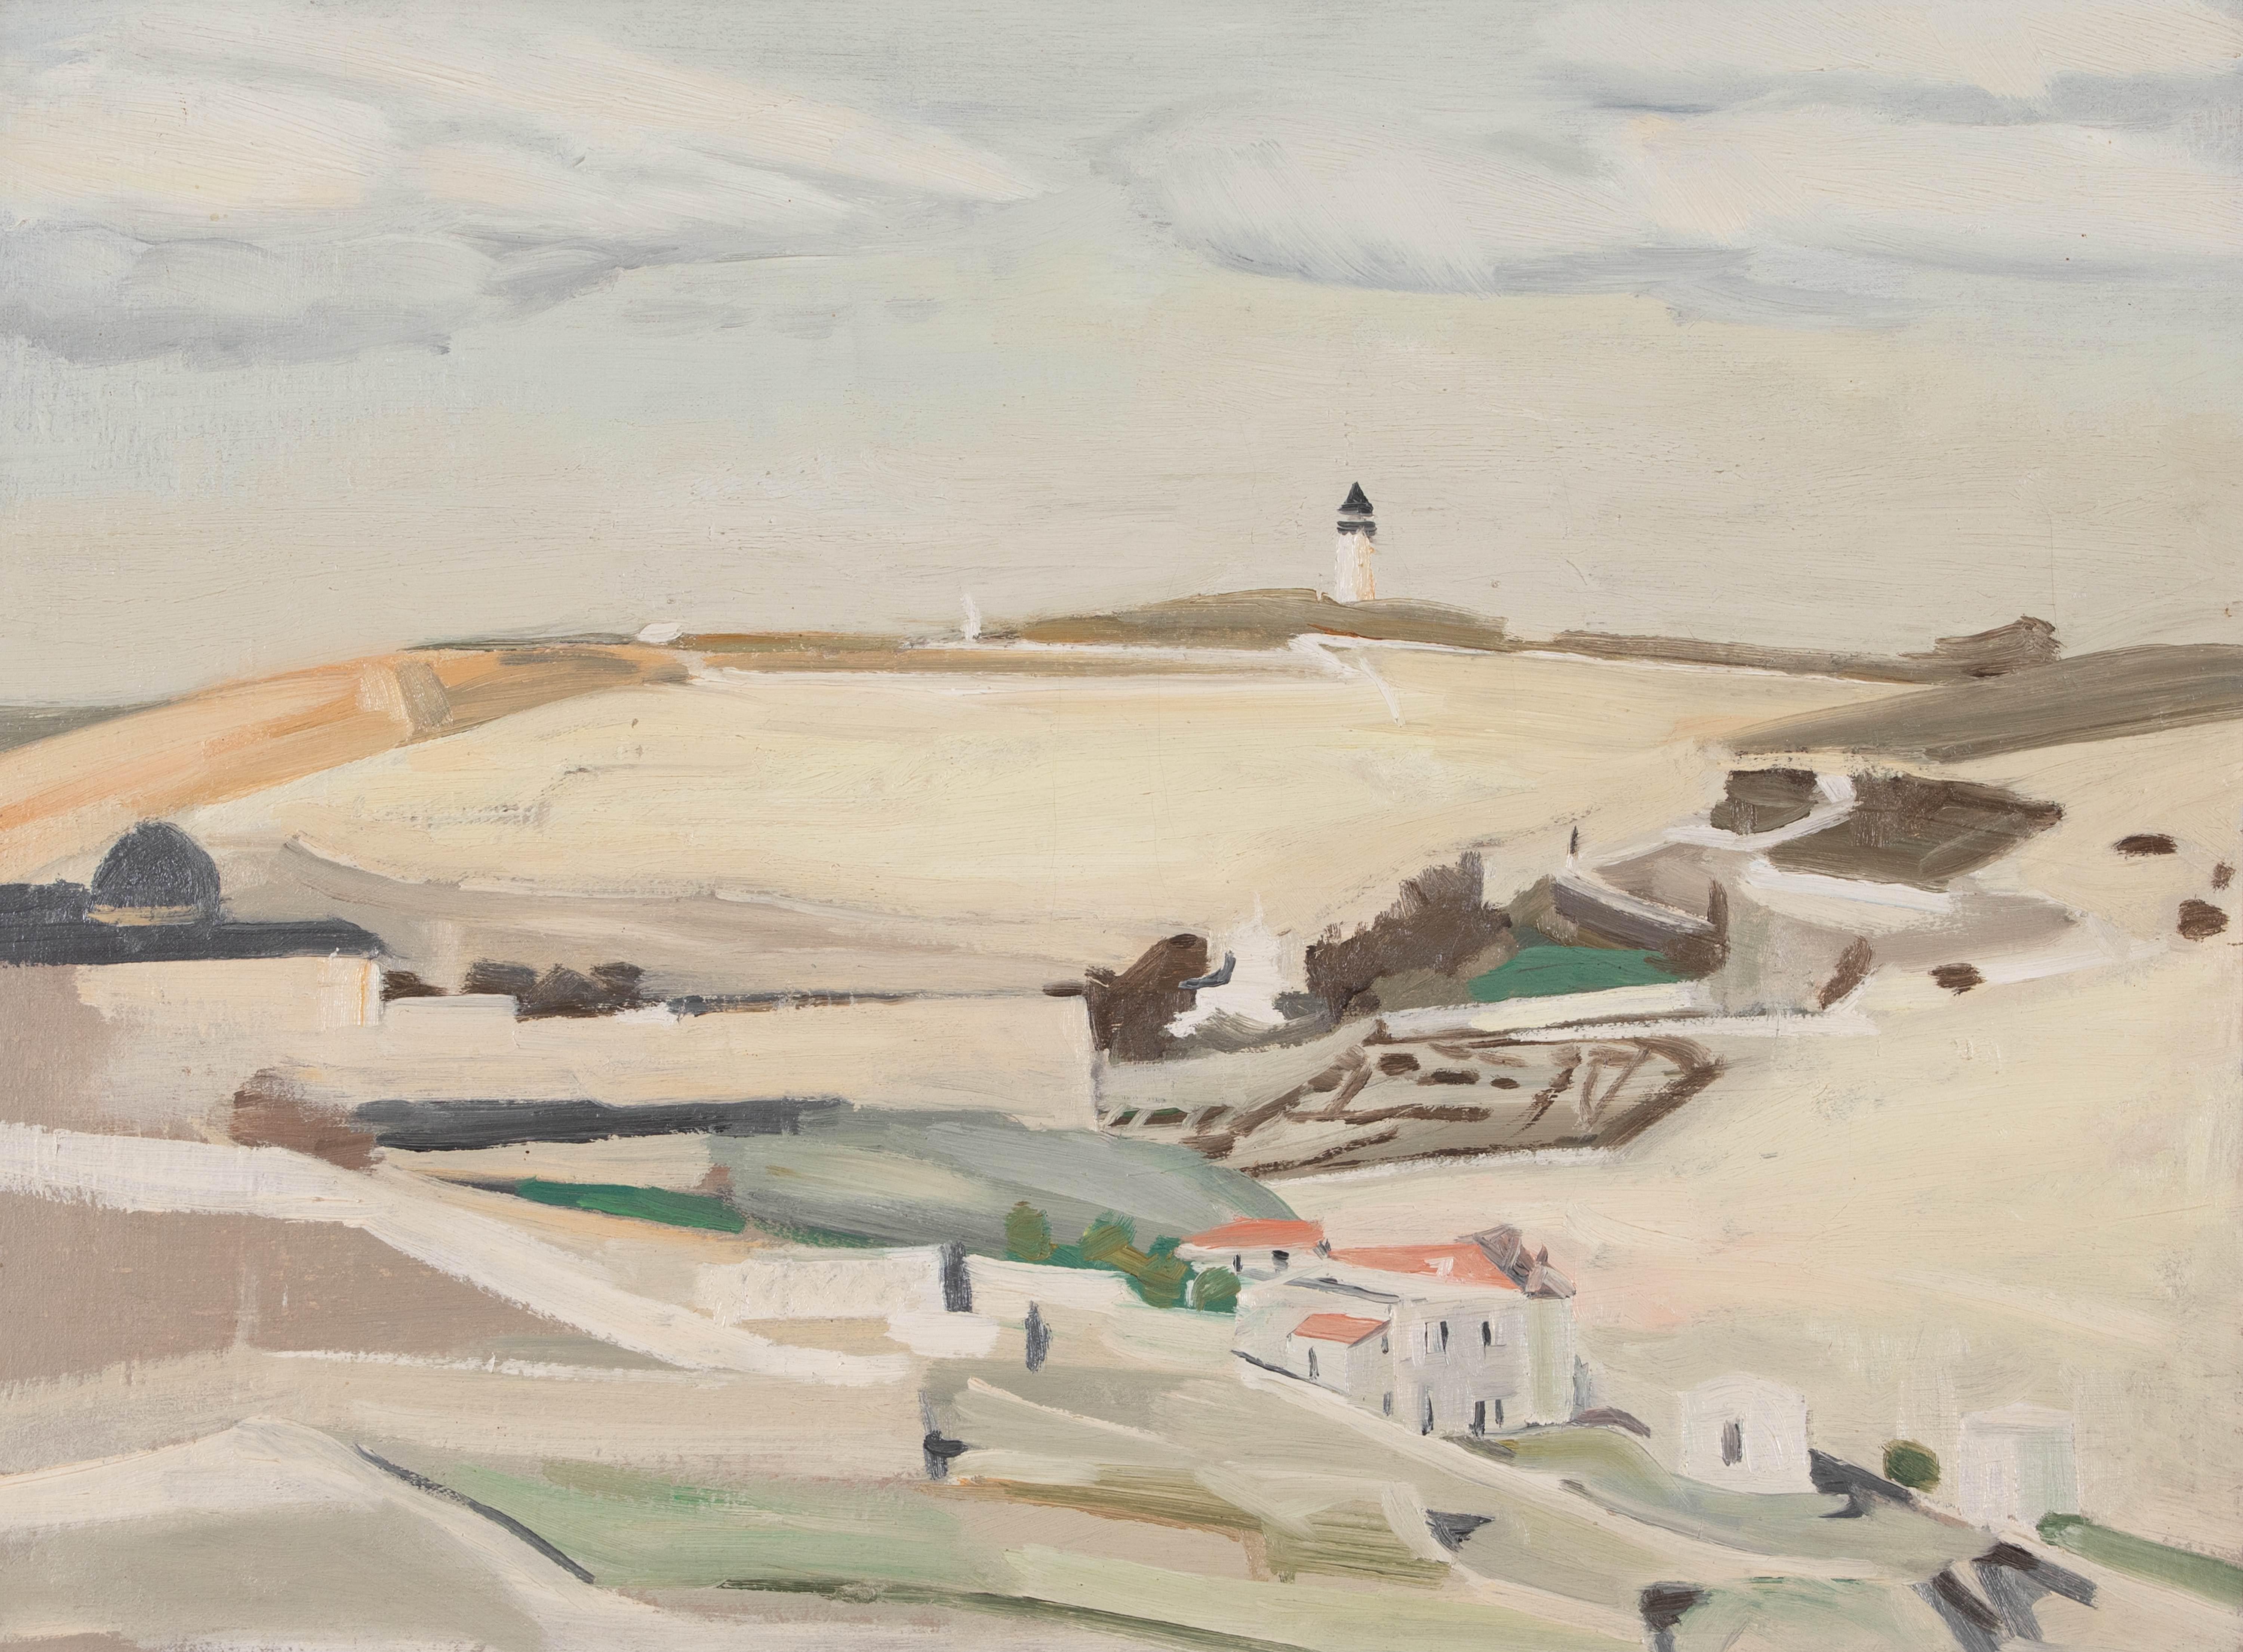 Mount Scopus and Government House by David Bomberg (1890-1957)
Oil on canvas
53.5 x 70.5 cm (21 x 27 ³/₄ inches)
Executed in 1923

Richard Cork has confirmed the authenticity of this work by David Bomberg. 

Provenance: The Leicester Galleries,